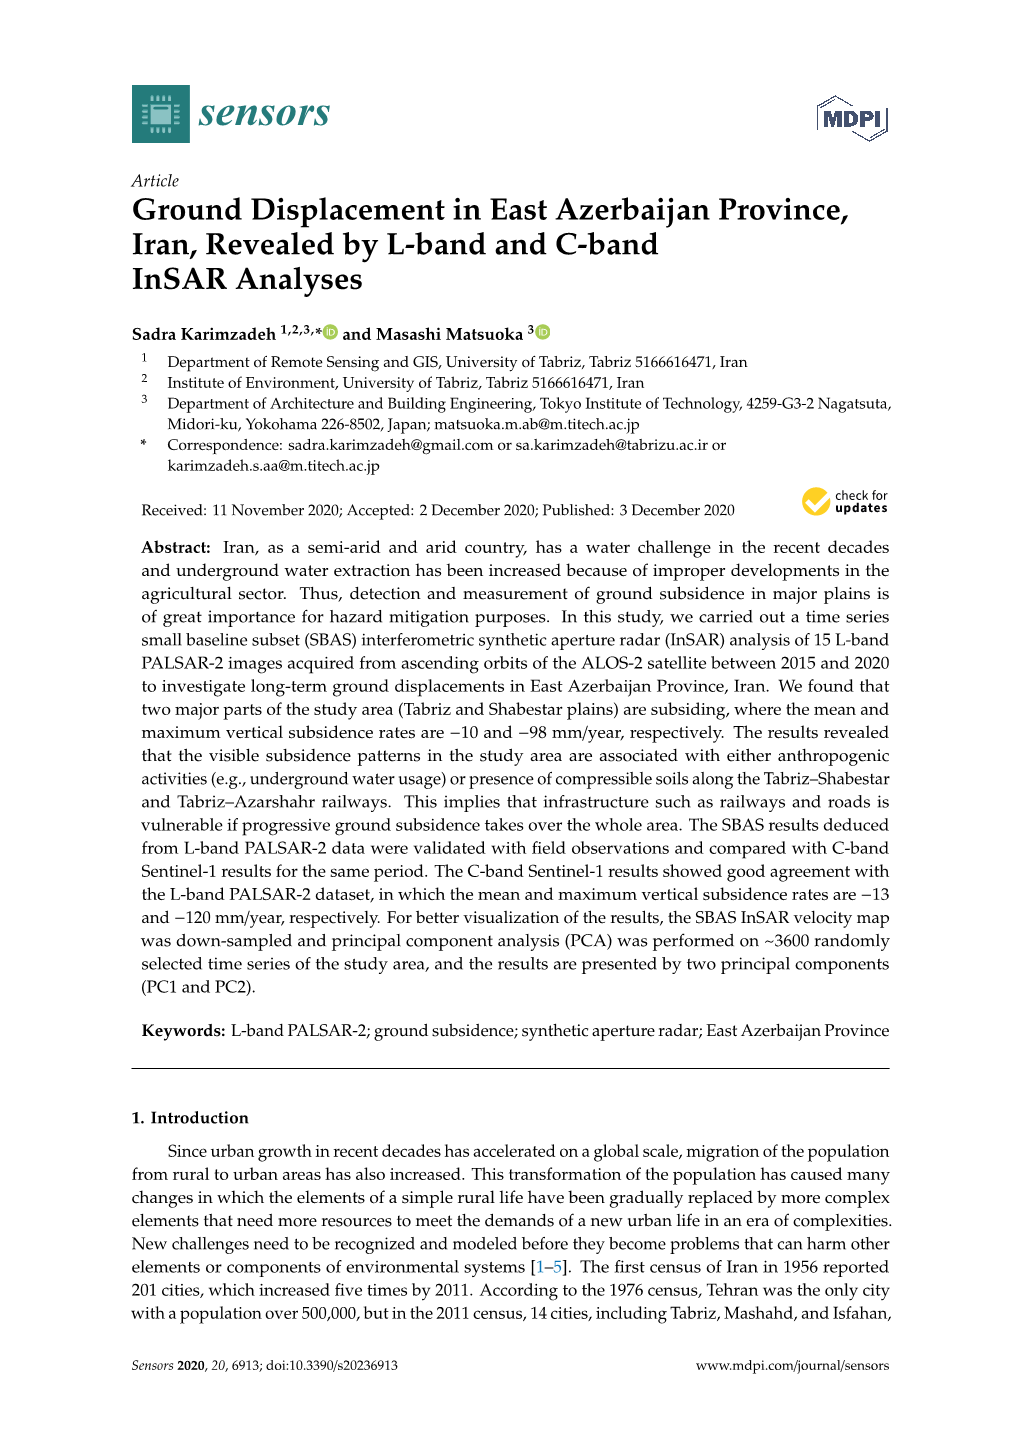 Ground Displacement in East Azerbaijan Province, Iran, Revealed by L-Band and C-Band Insar Analyses